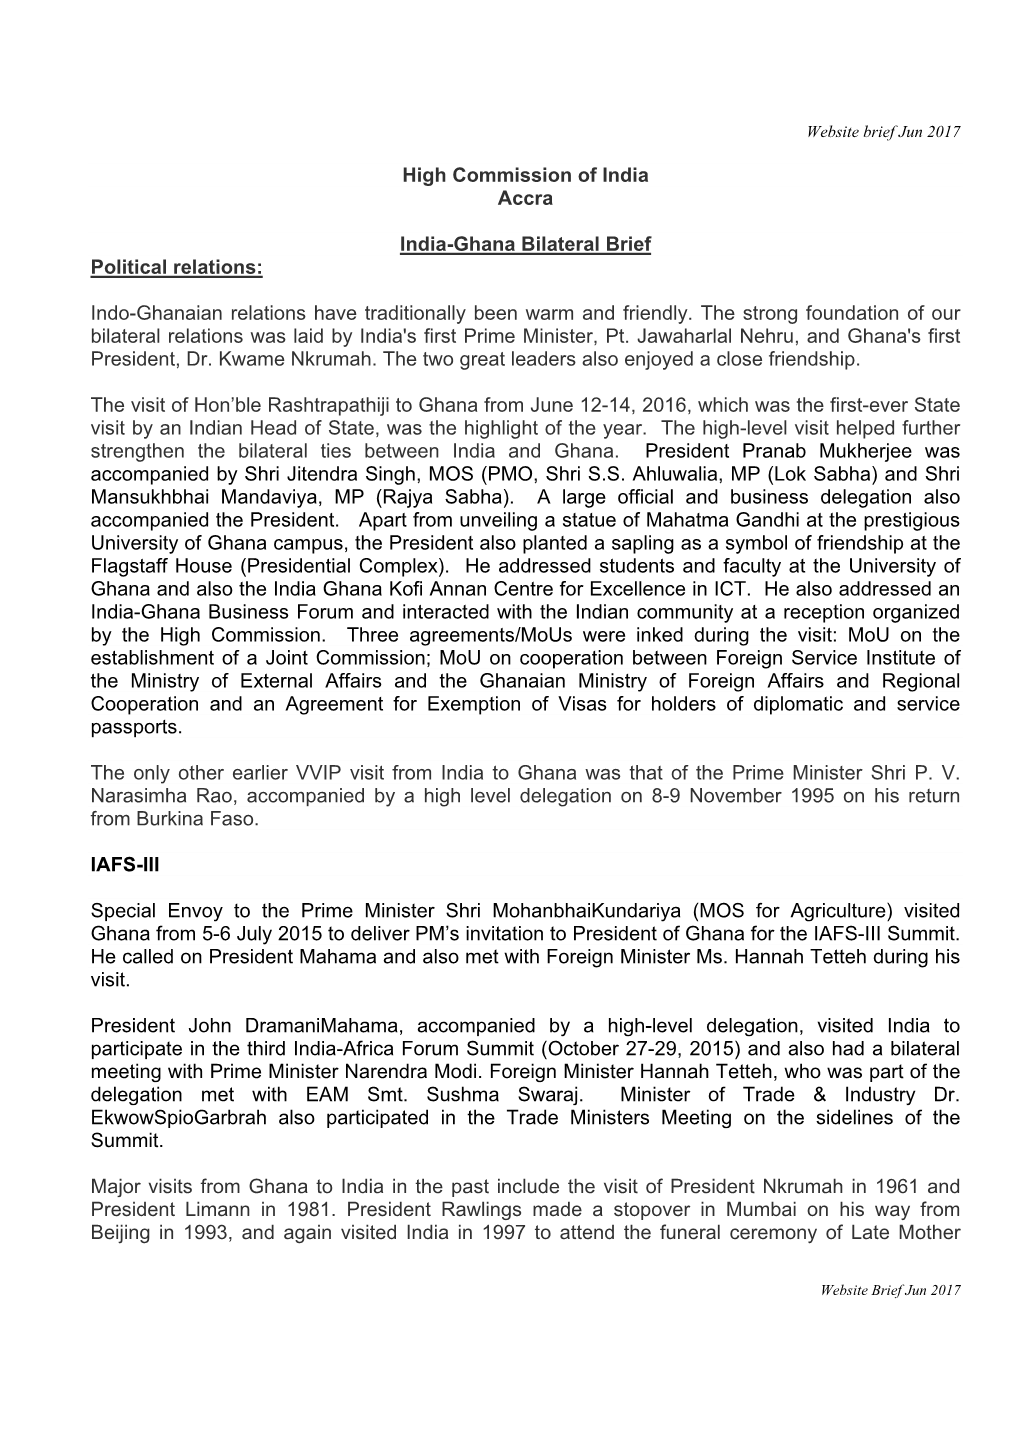 High Commission of India Accra India-Ghana Bilateral Brief Political